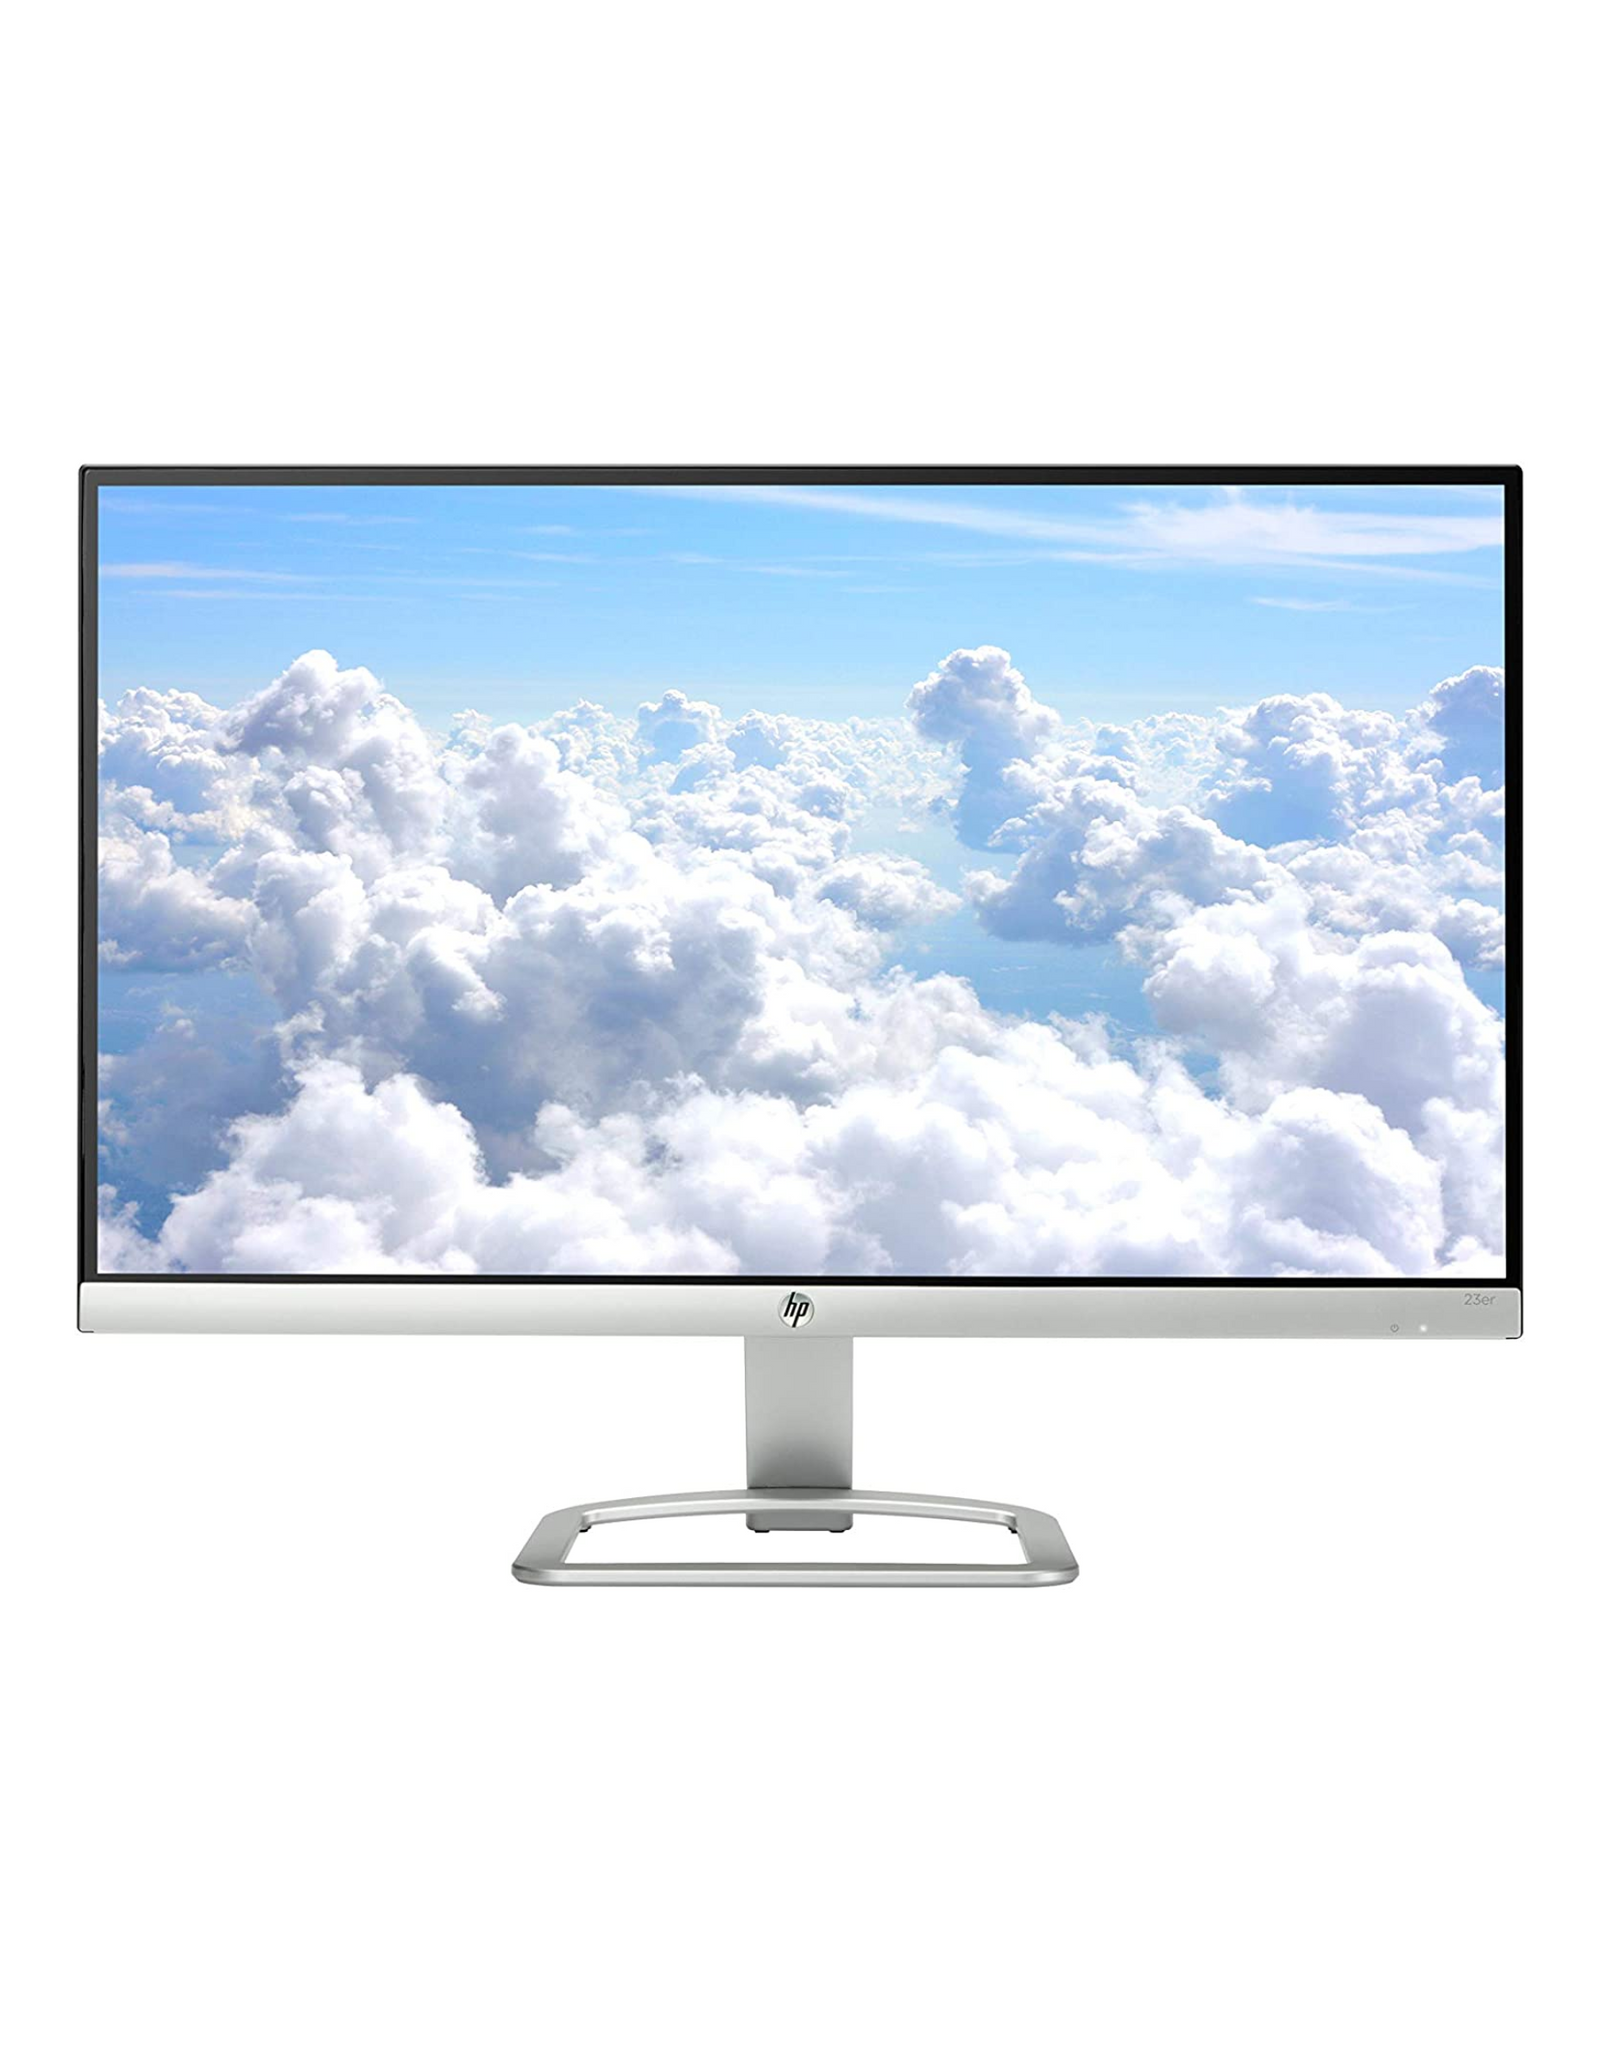 HP 23er 23-Inch Full HD 1080p IPS LED Monitor Series (T3M76AA) with Frameless Bezel and VGA & HDMI